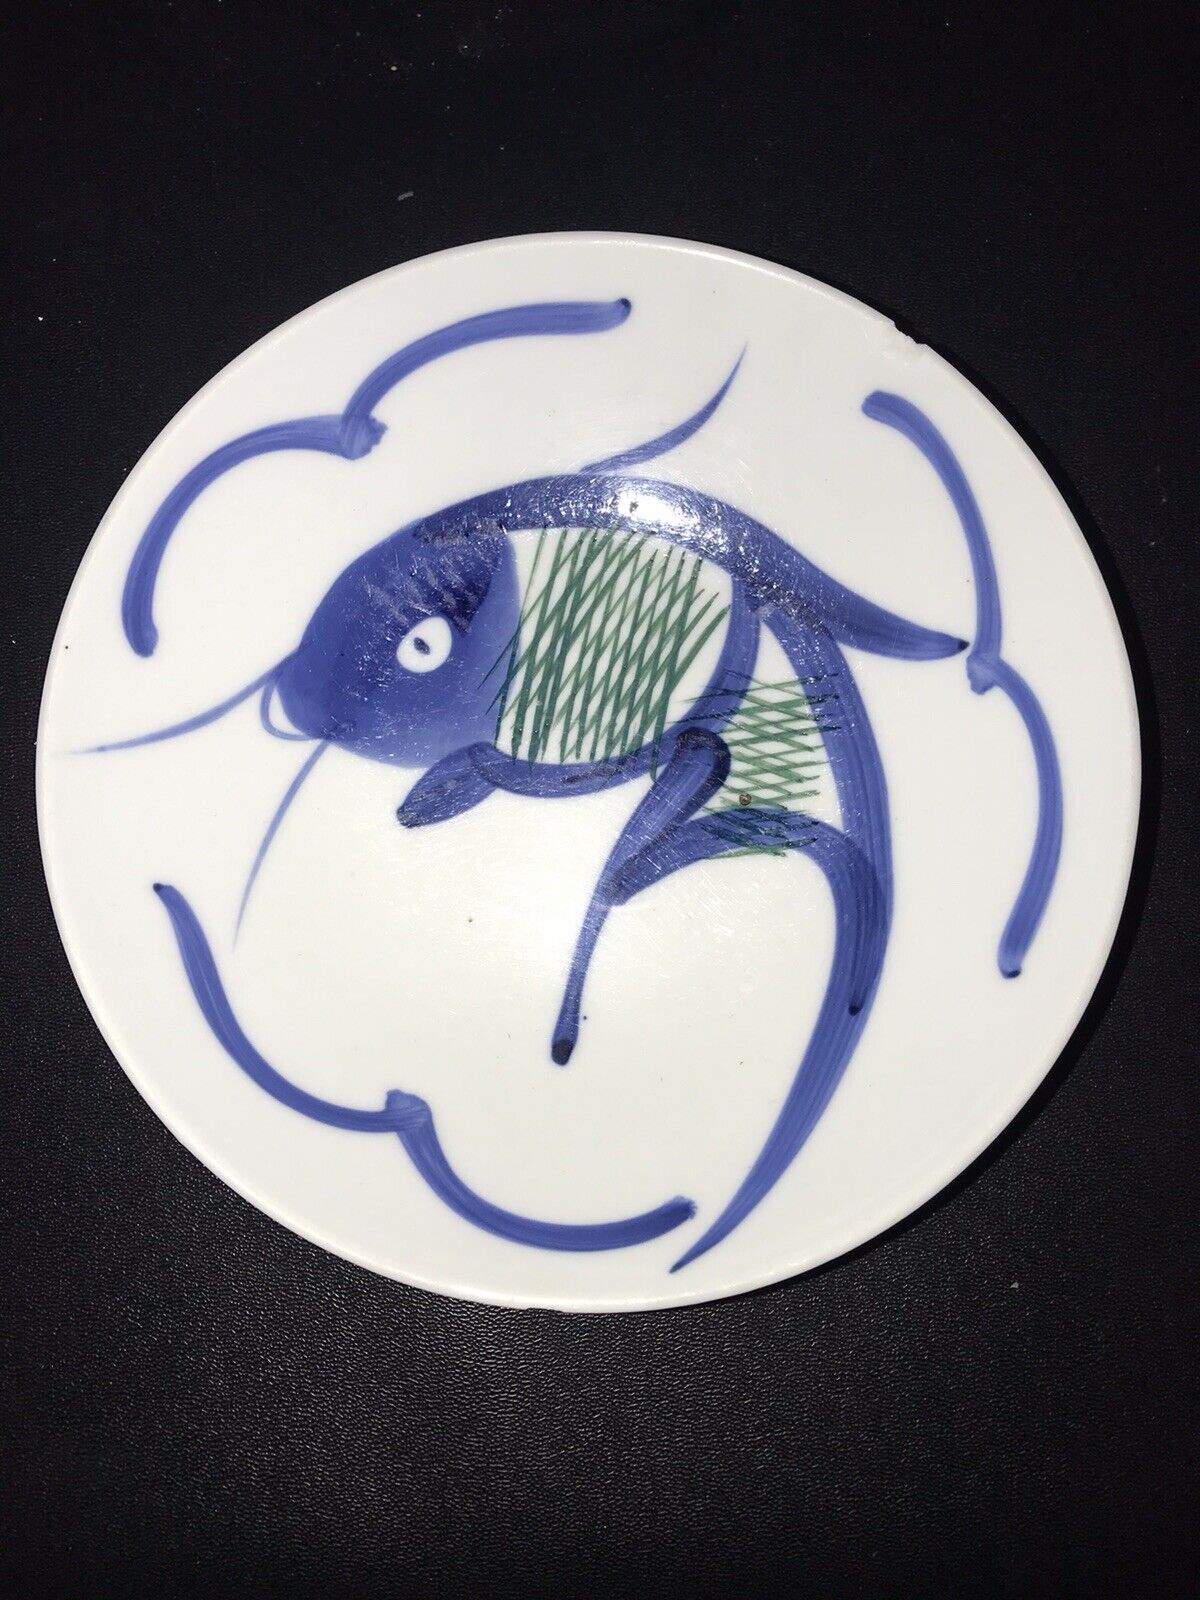 CHINA CHINESE FOUR CHARACTERS SIGN PLATE FISH BLUE GREEN PORCELAIN 